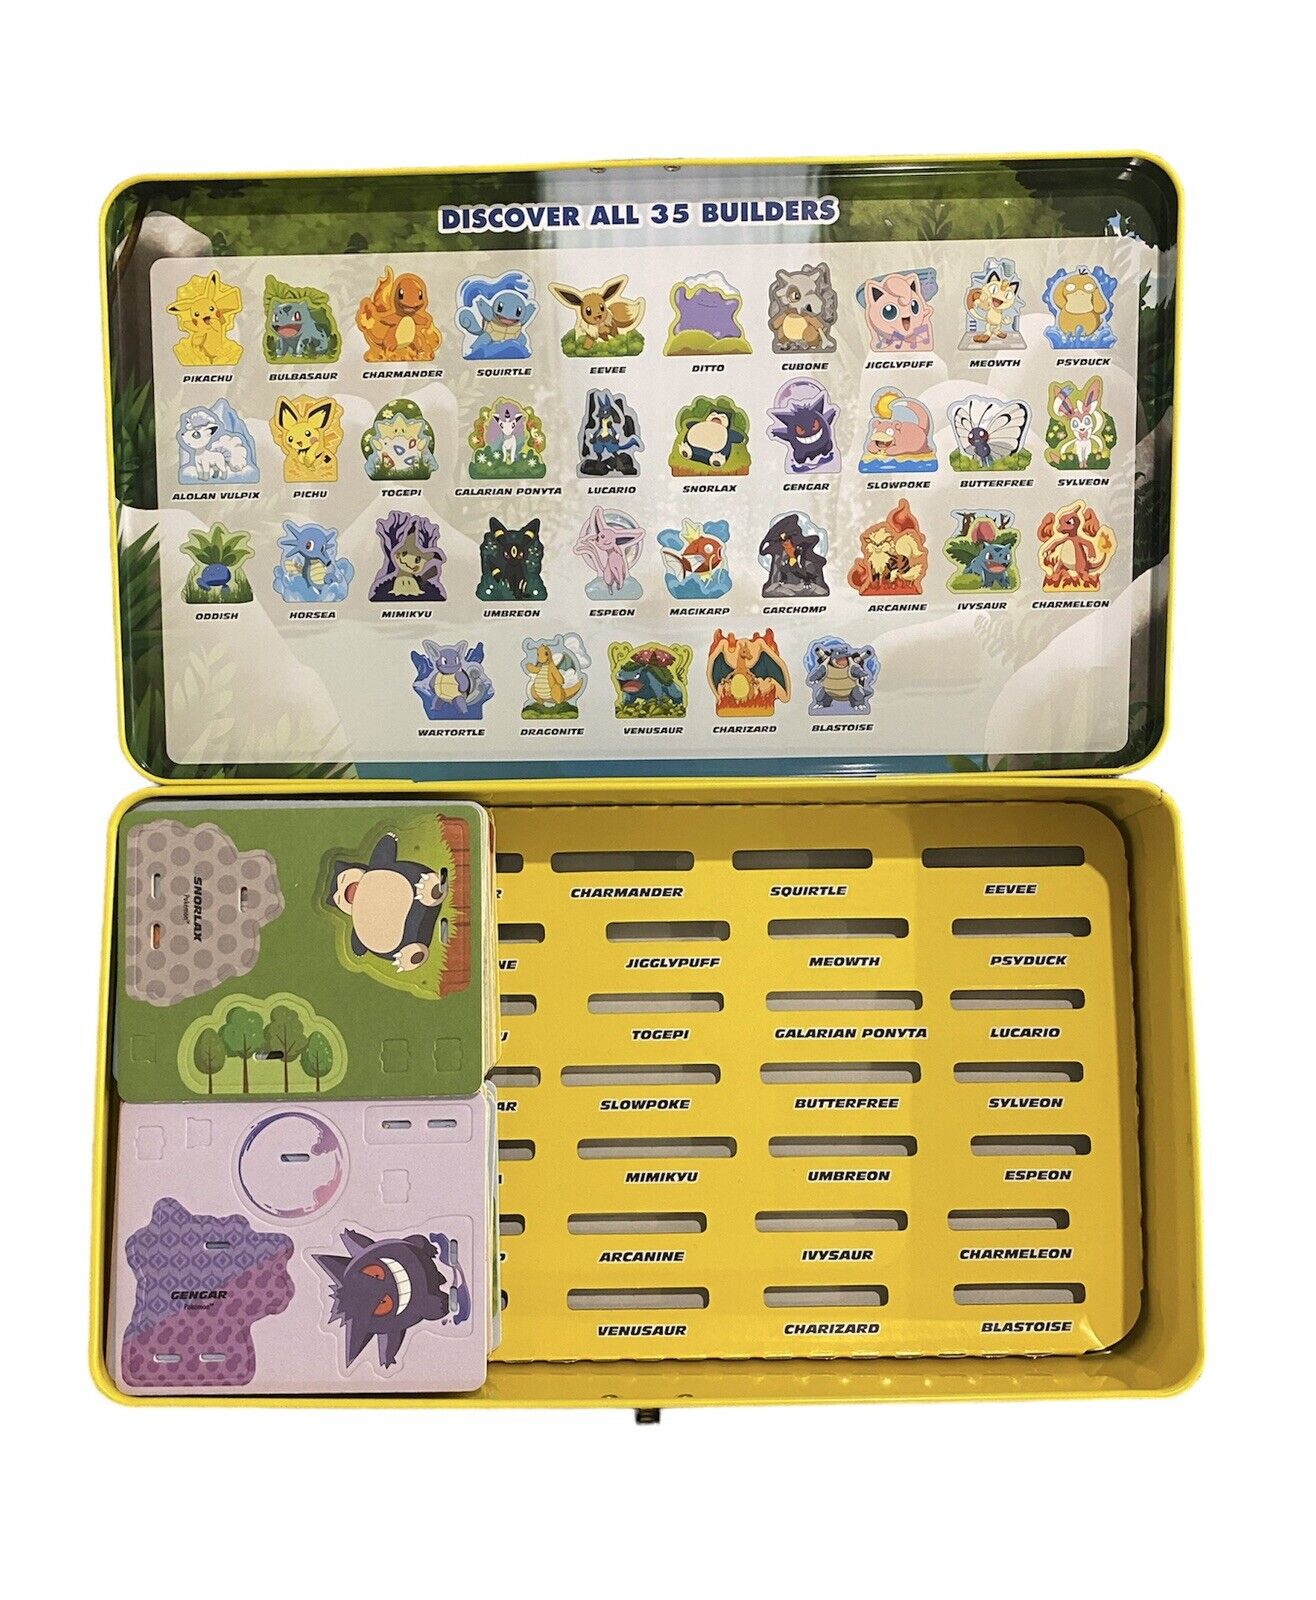 FullSet Coles Pokemon Builders With Case, Limited Edition For Pokémon Collectors